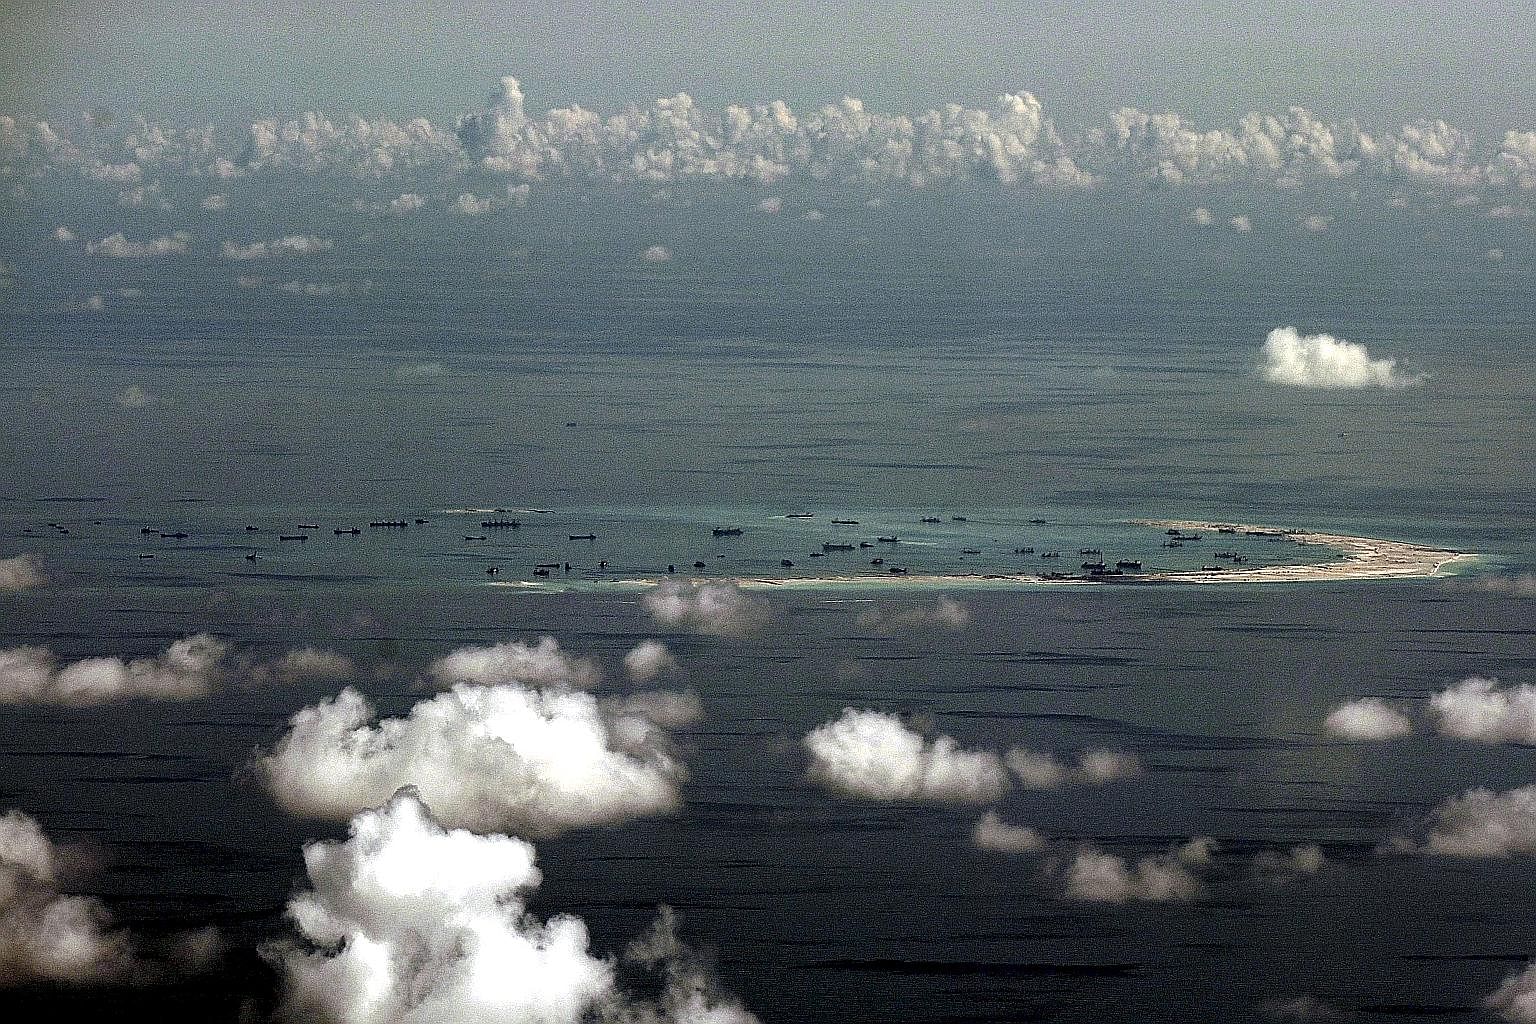 An aerial photo showing China's alleged land reclamation on Mischief Reef in the South China Sea, west of Palawan in the Philippines. Several "known unknowns" could affect the South China Sea situation in the foreseeable future.